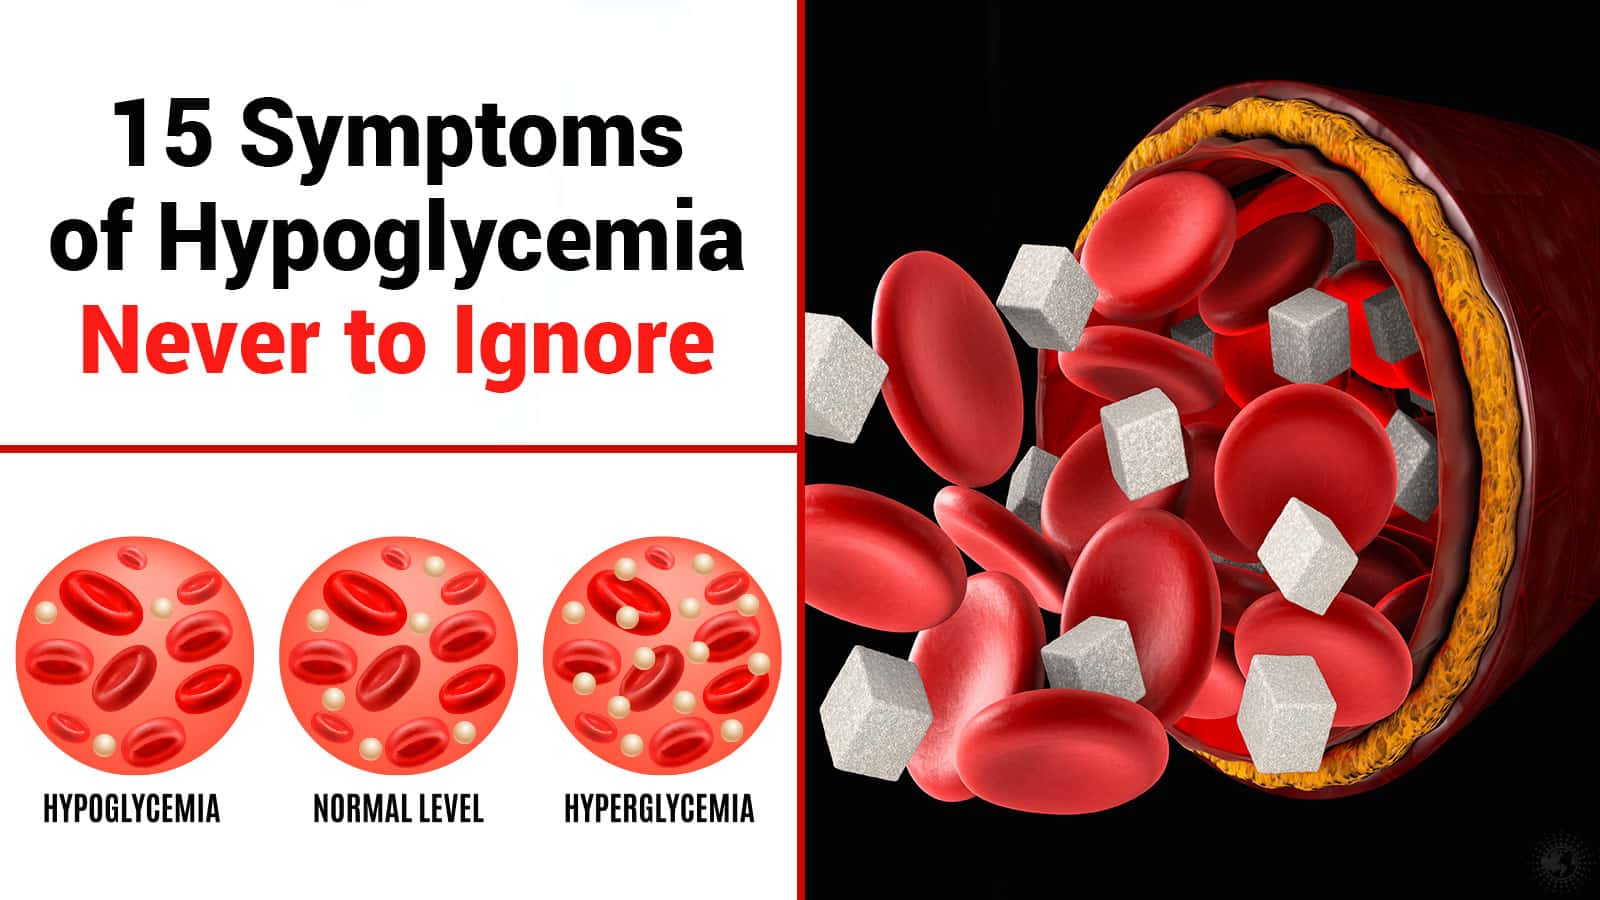 15 Symptoms of Hypoglycemia Never to Ignore